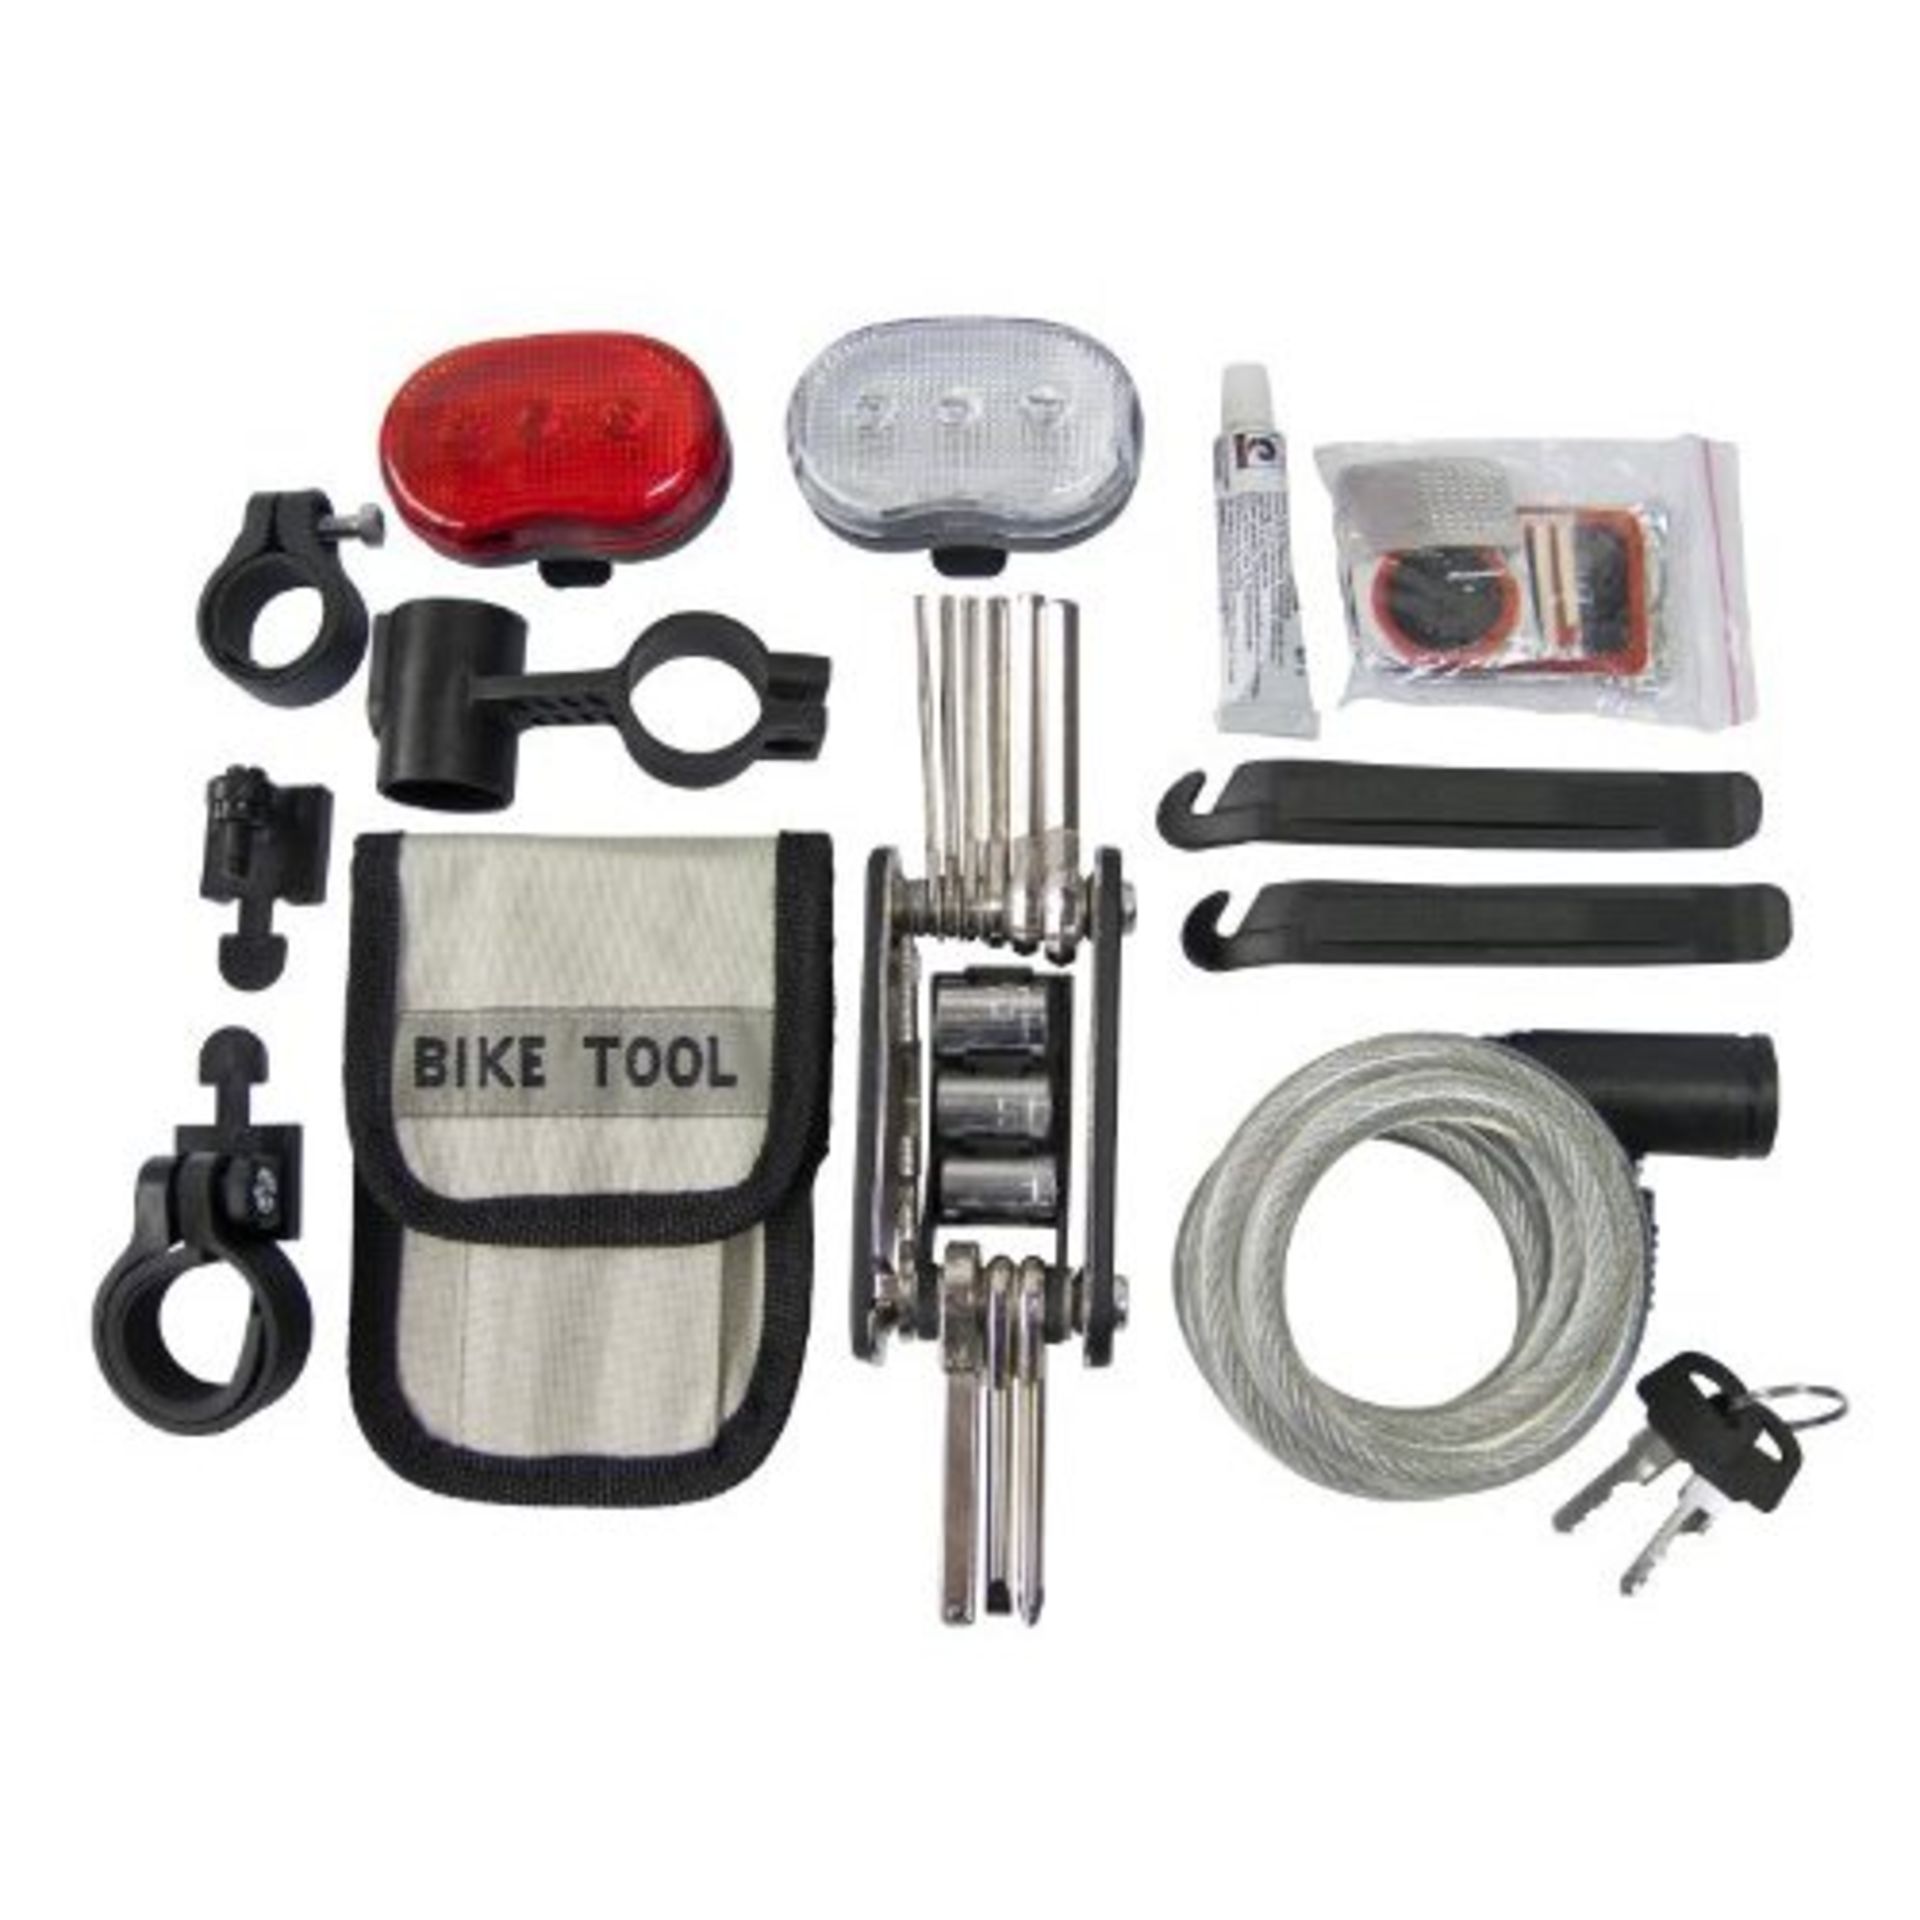 V Brand New Bicycle Accessory Set Includes Multi Tool - Sockets - Lock - Puncture Kit - Front & Rear